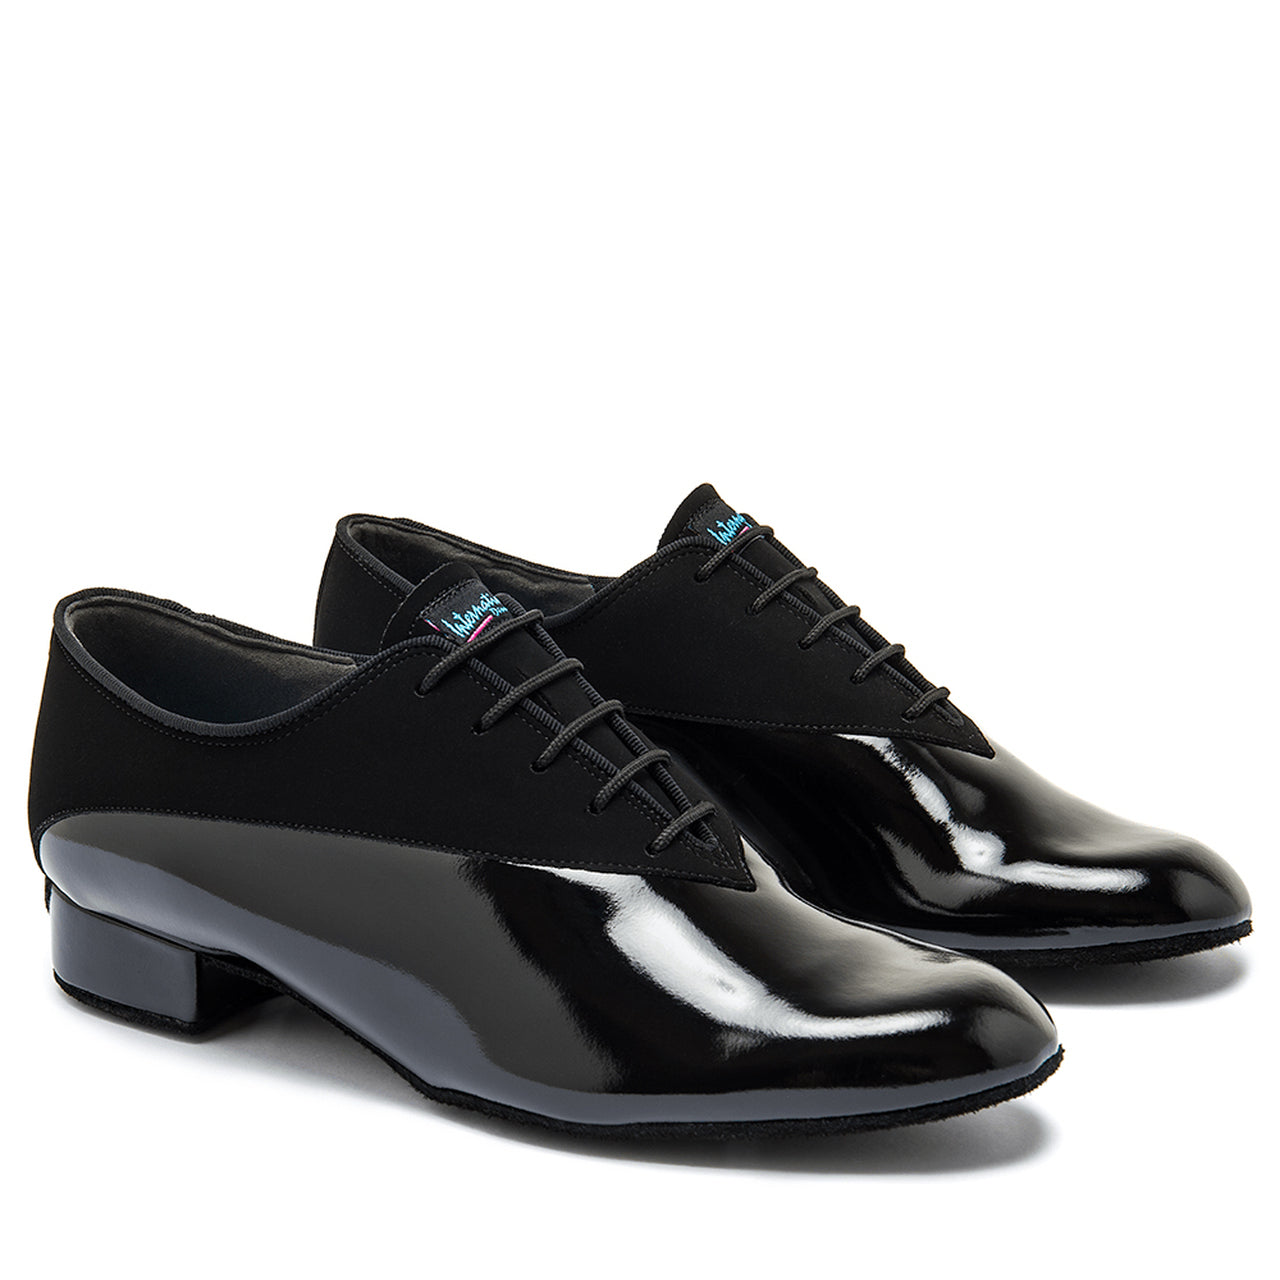 International Dance Shoes IDS Ballroom Men's Black Dance Shoes Available in Nubuck and Patent Leather PINO FLEX and PINO